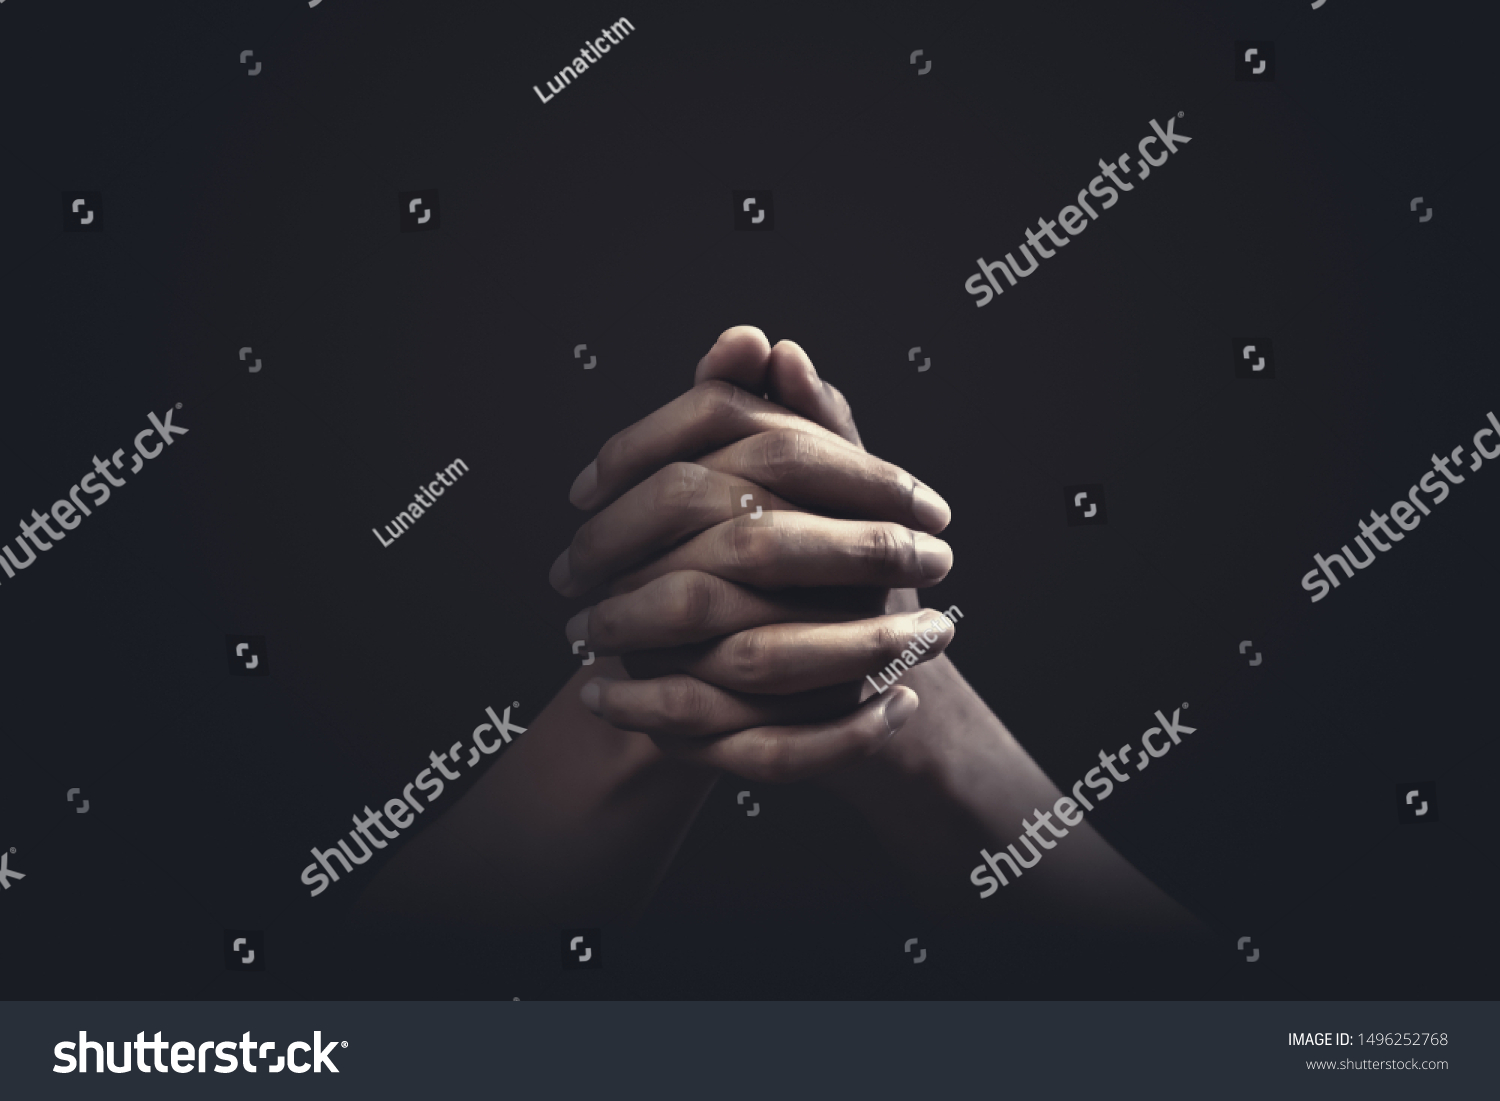 Praying hands with faith in religion and belief in God on dark background. Power of hope or love and devotion. #1496252768